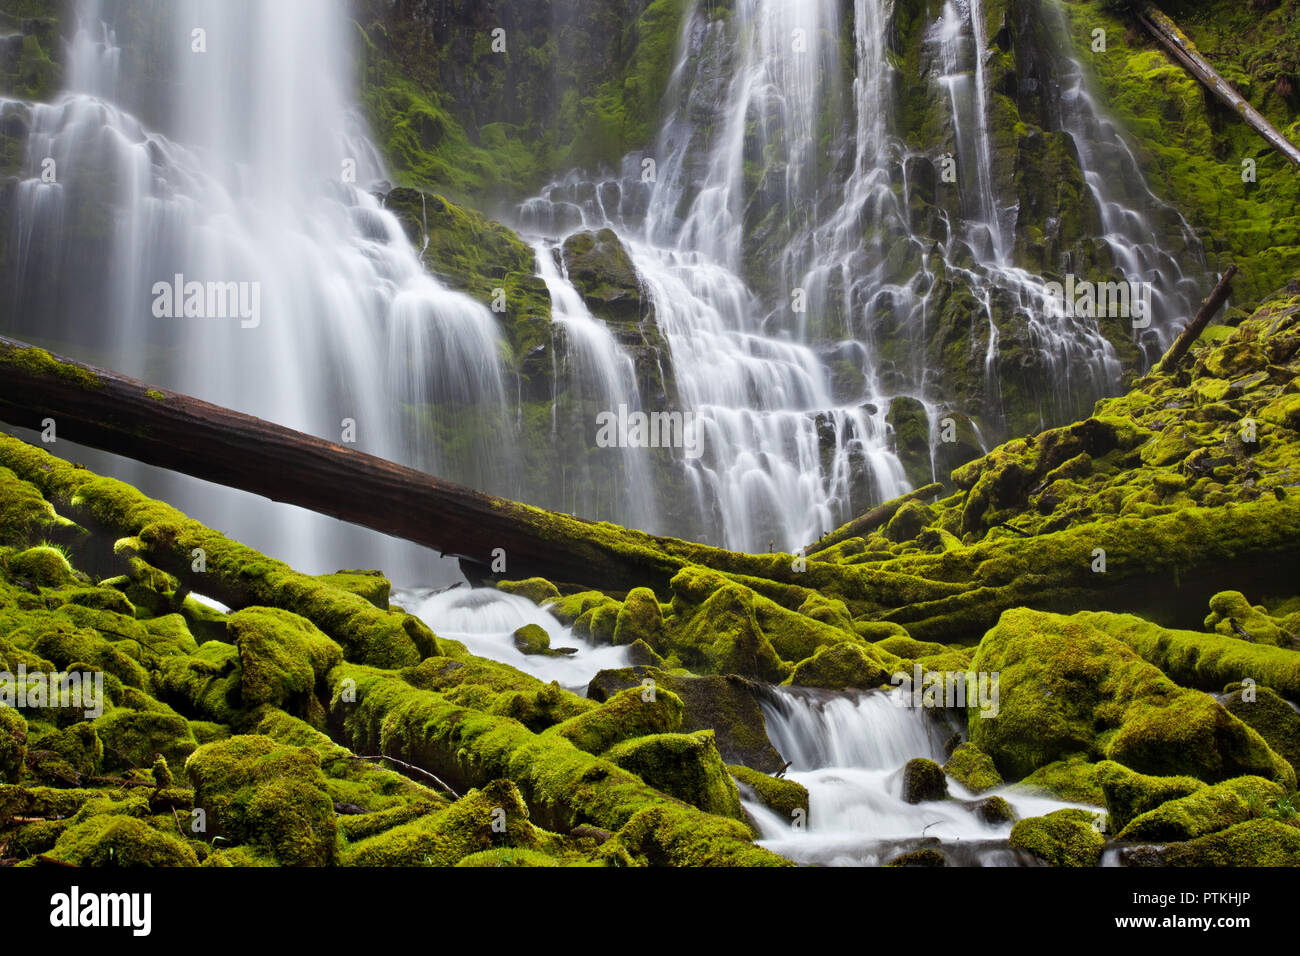 Proxy Falls in Oregon with mossy rocks and logs in the forest Stock Photo